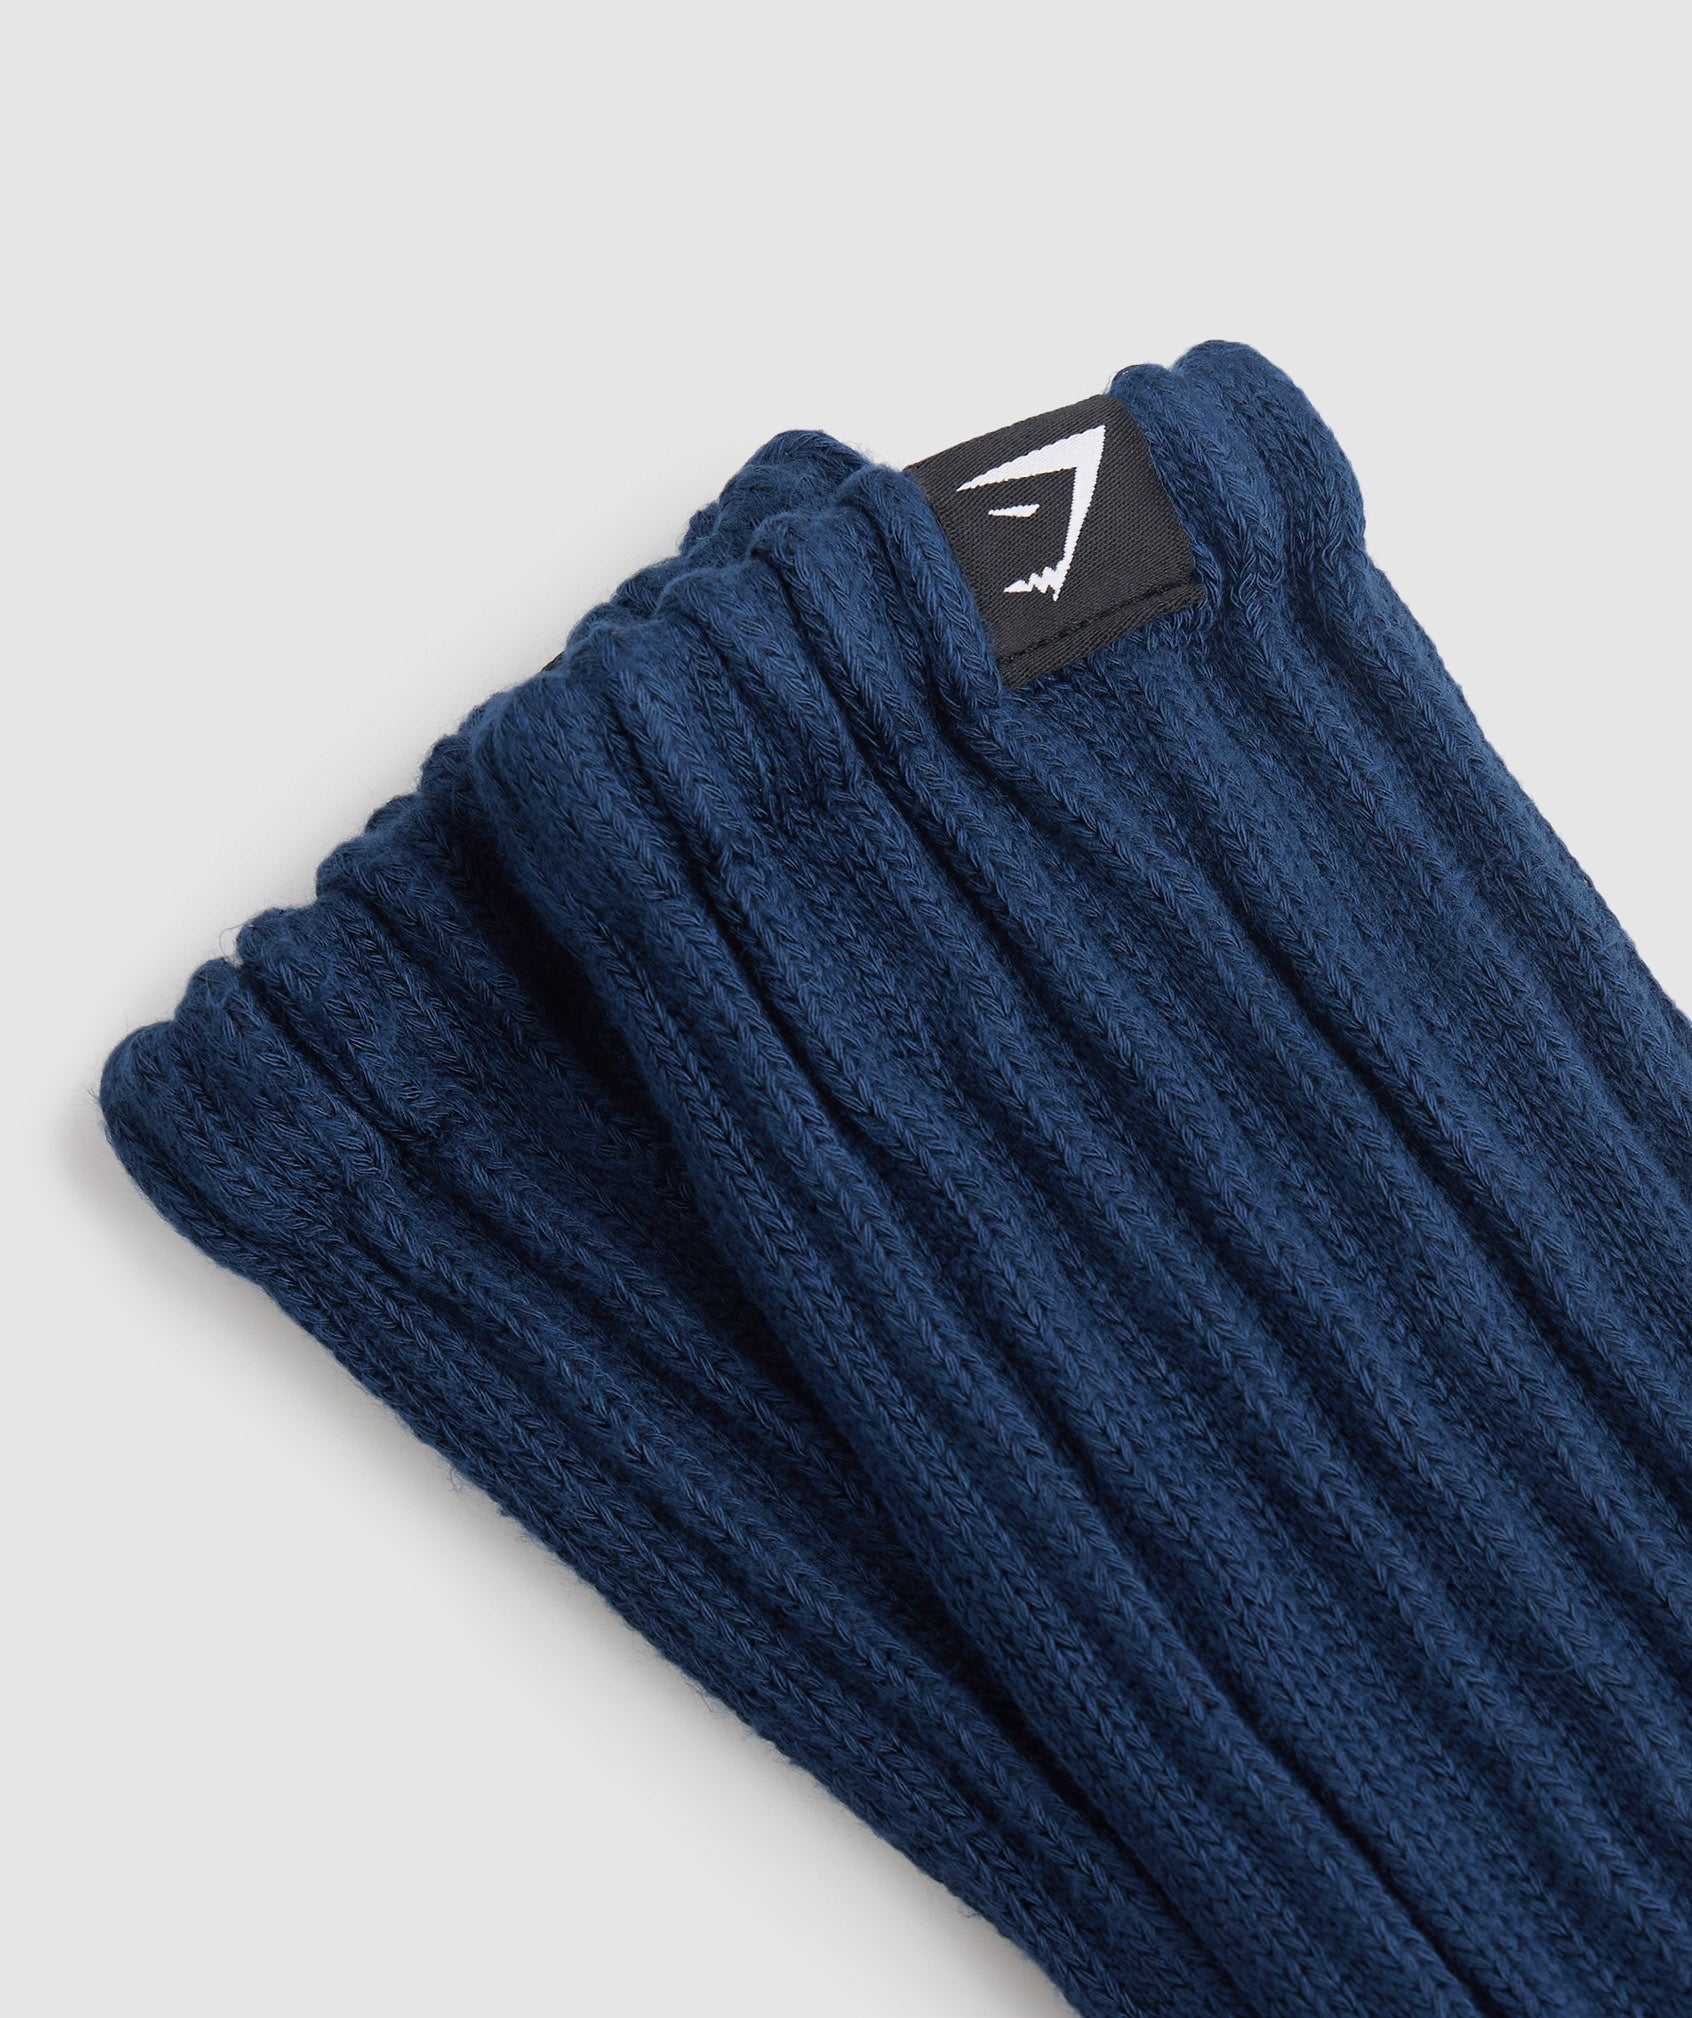 Comfy Rest Day Socks in Navy - view 2